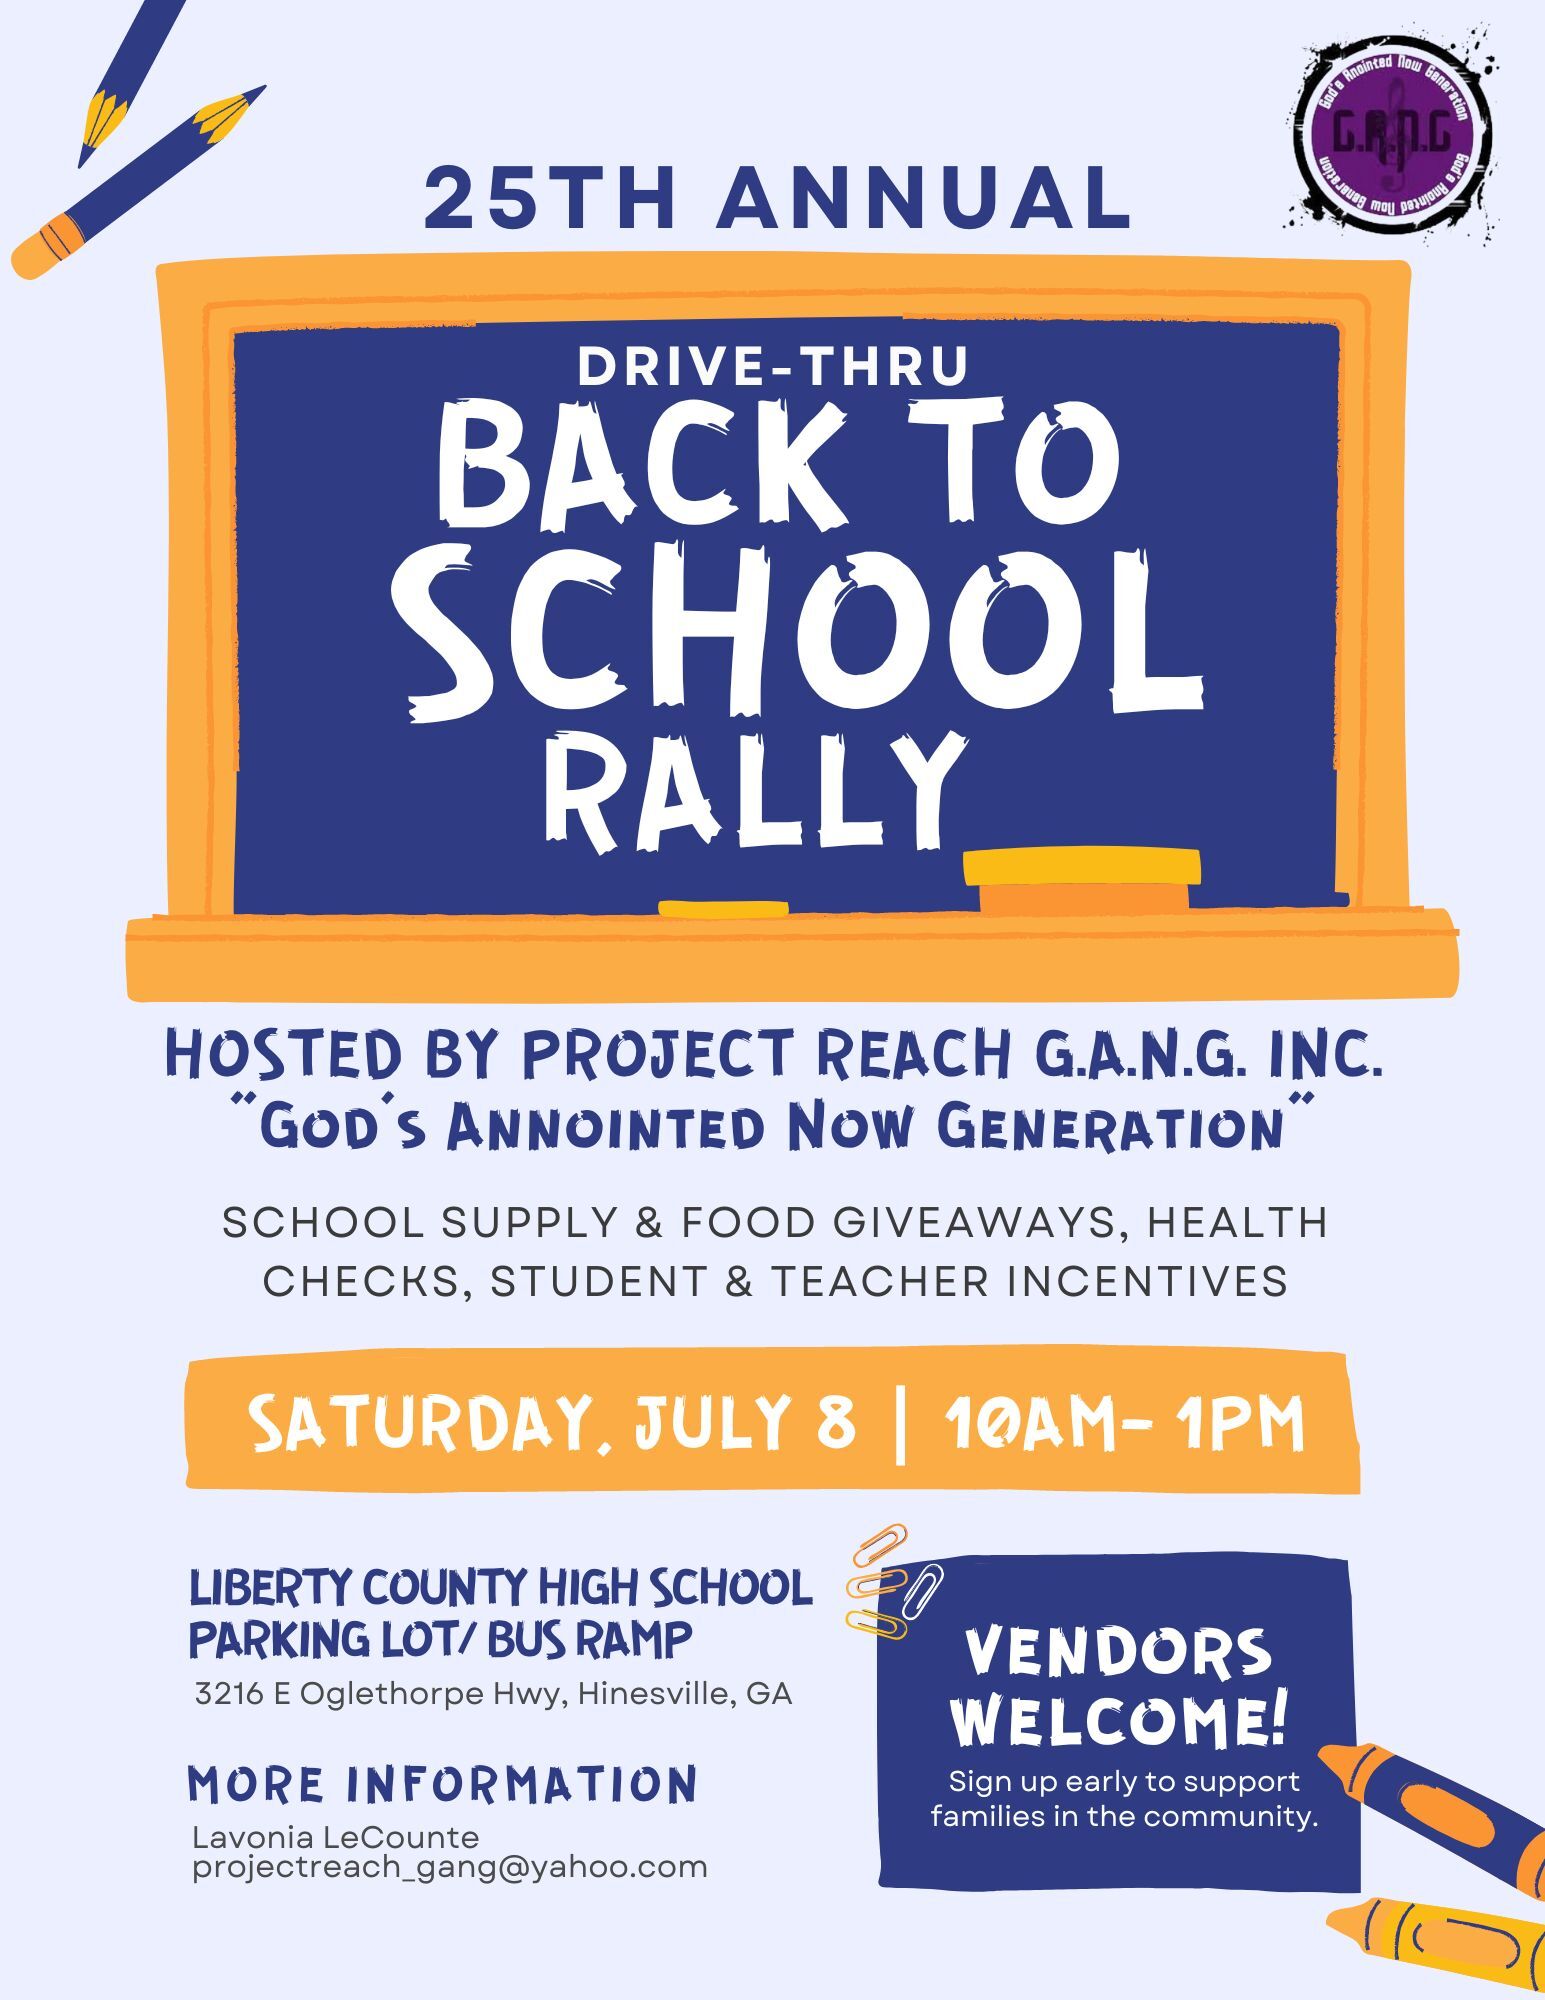 Back to school rally flyer